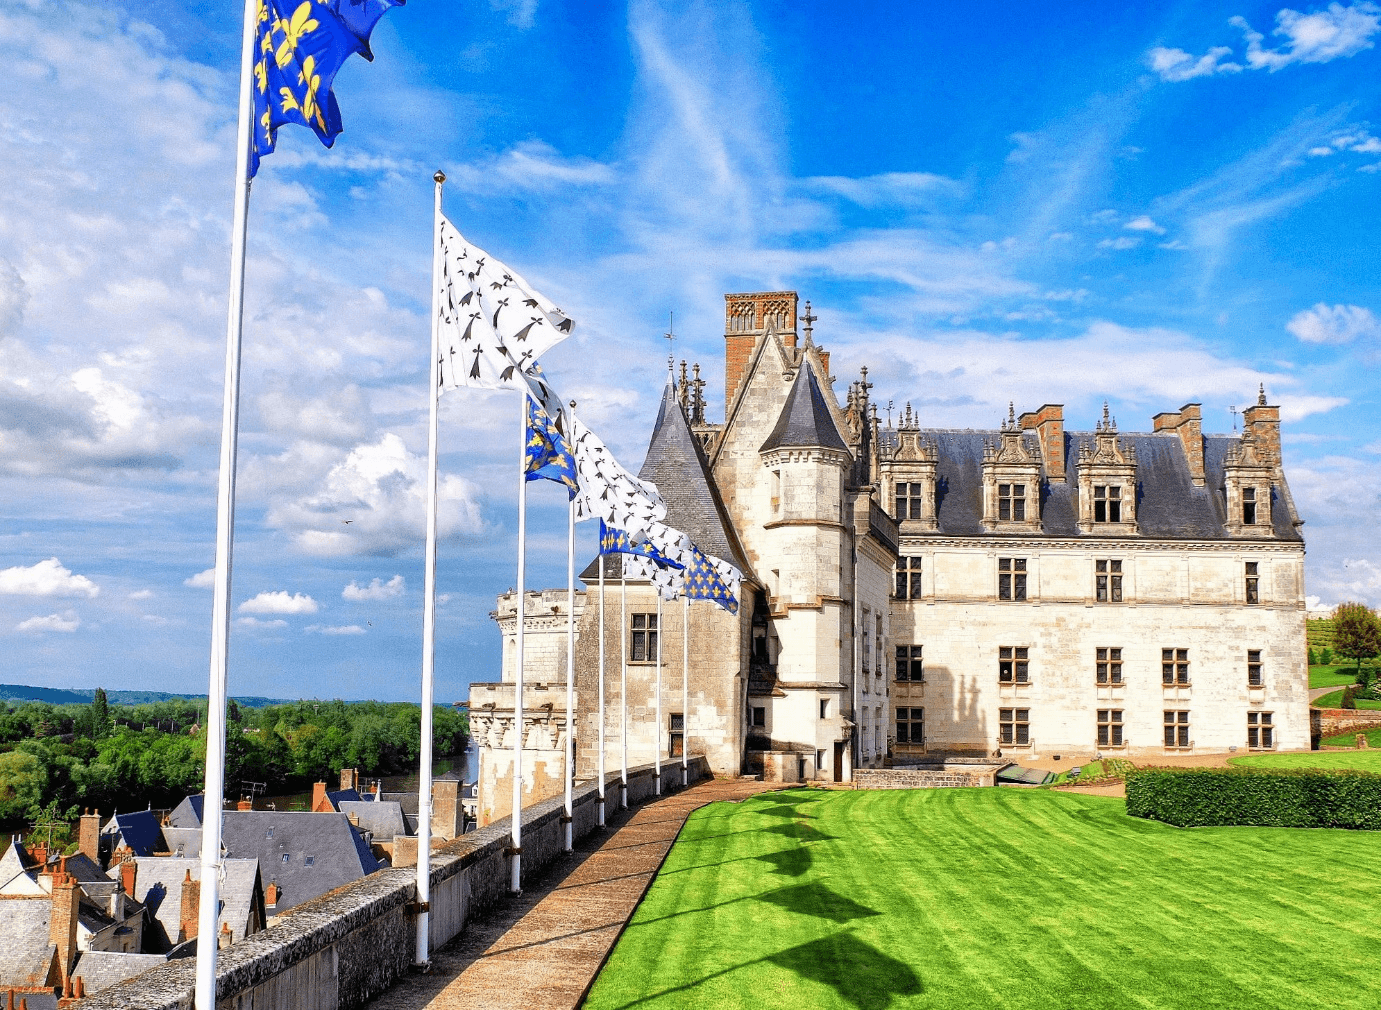 The French Royal Castle of Amboise in Loire Valley